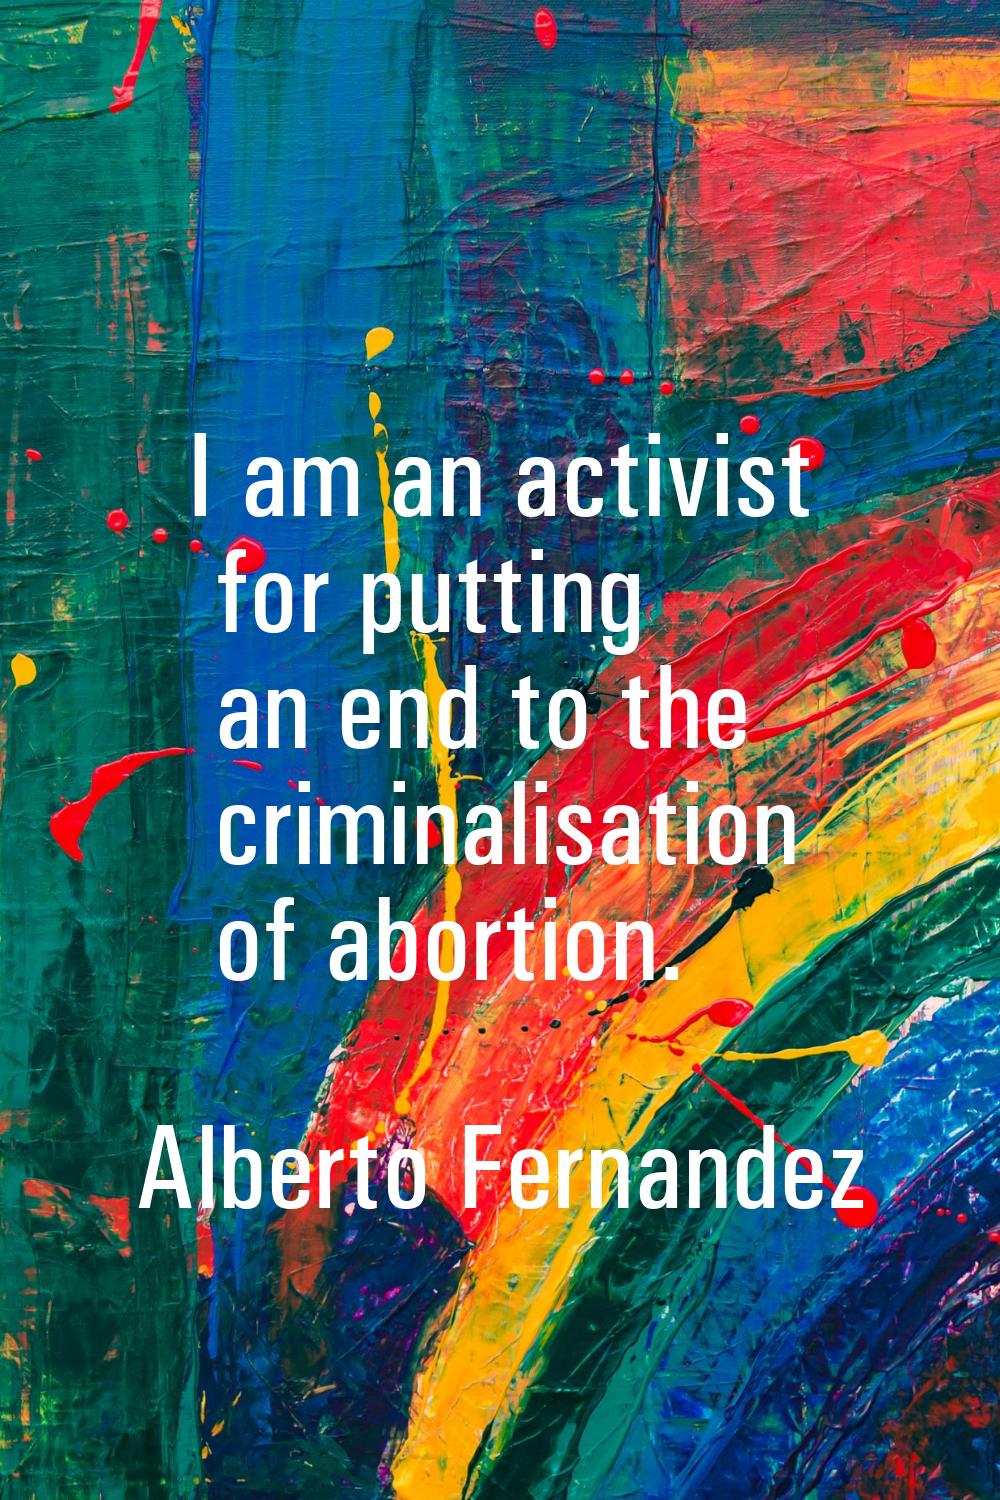 I am an activist for putting an end to the criminalisation of abortion.